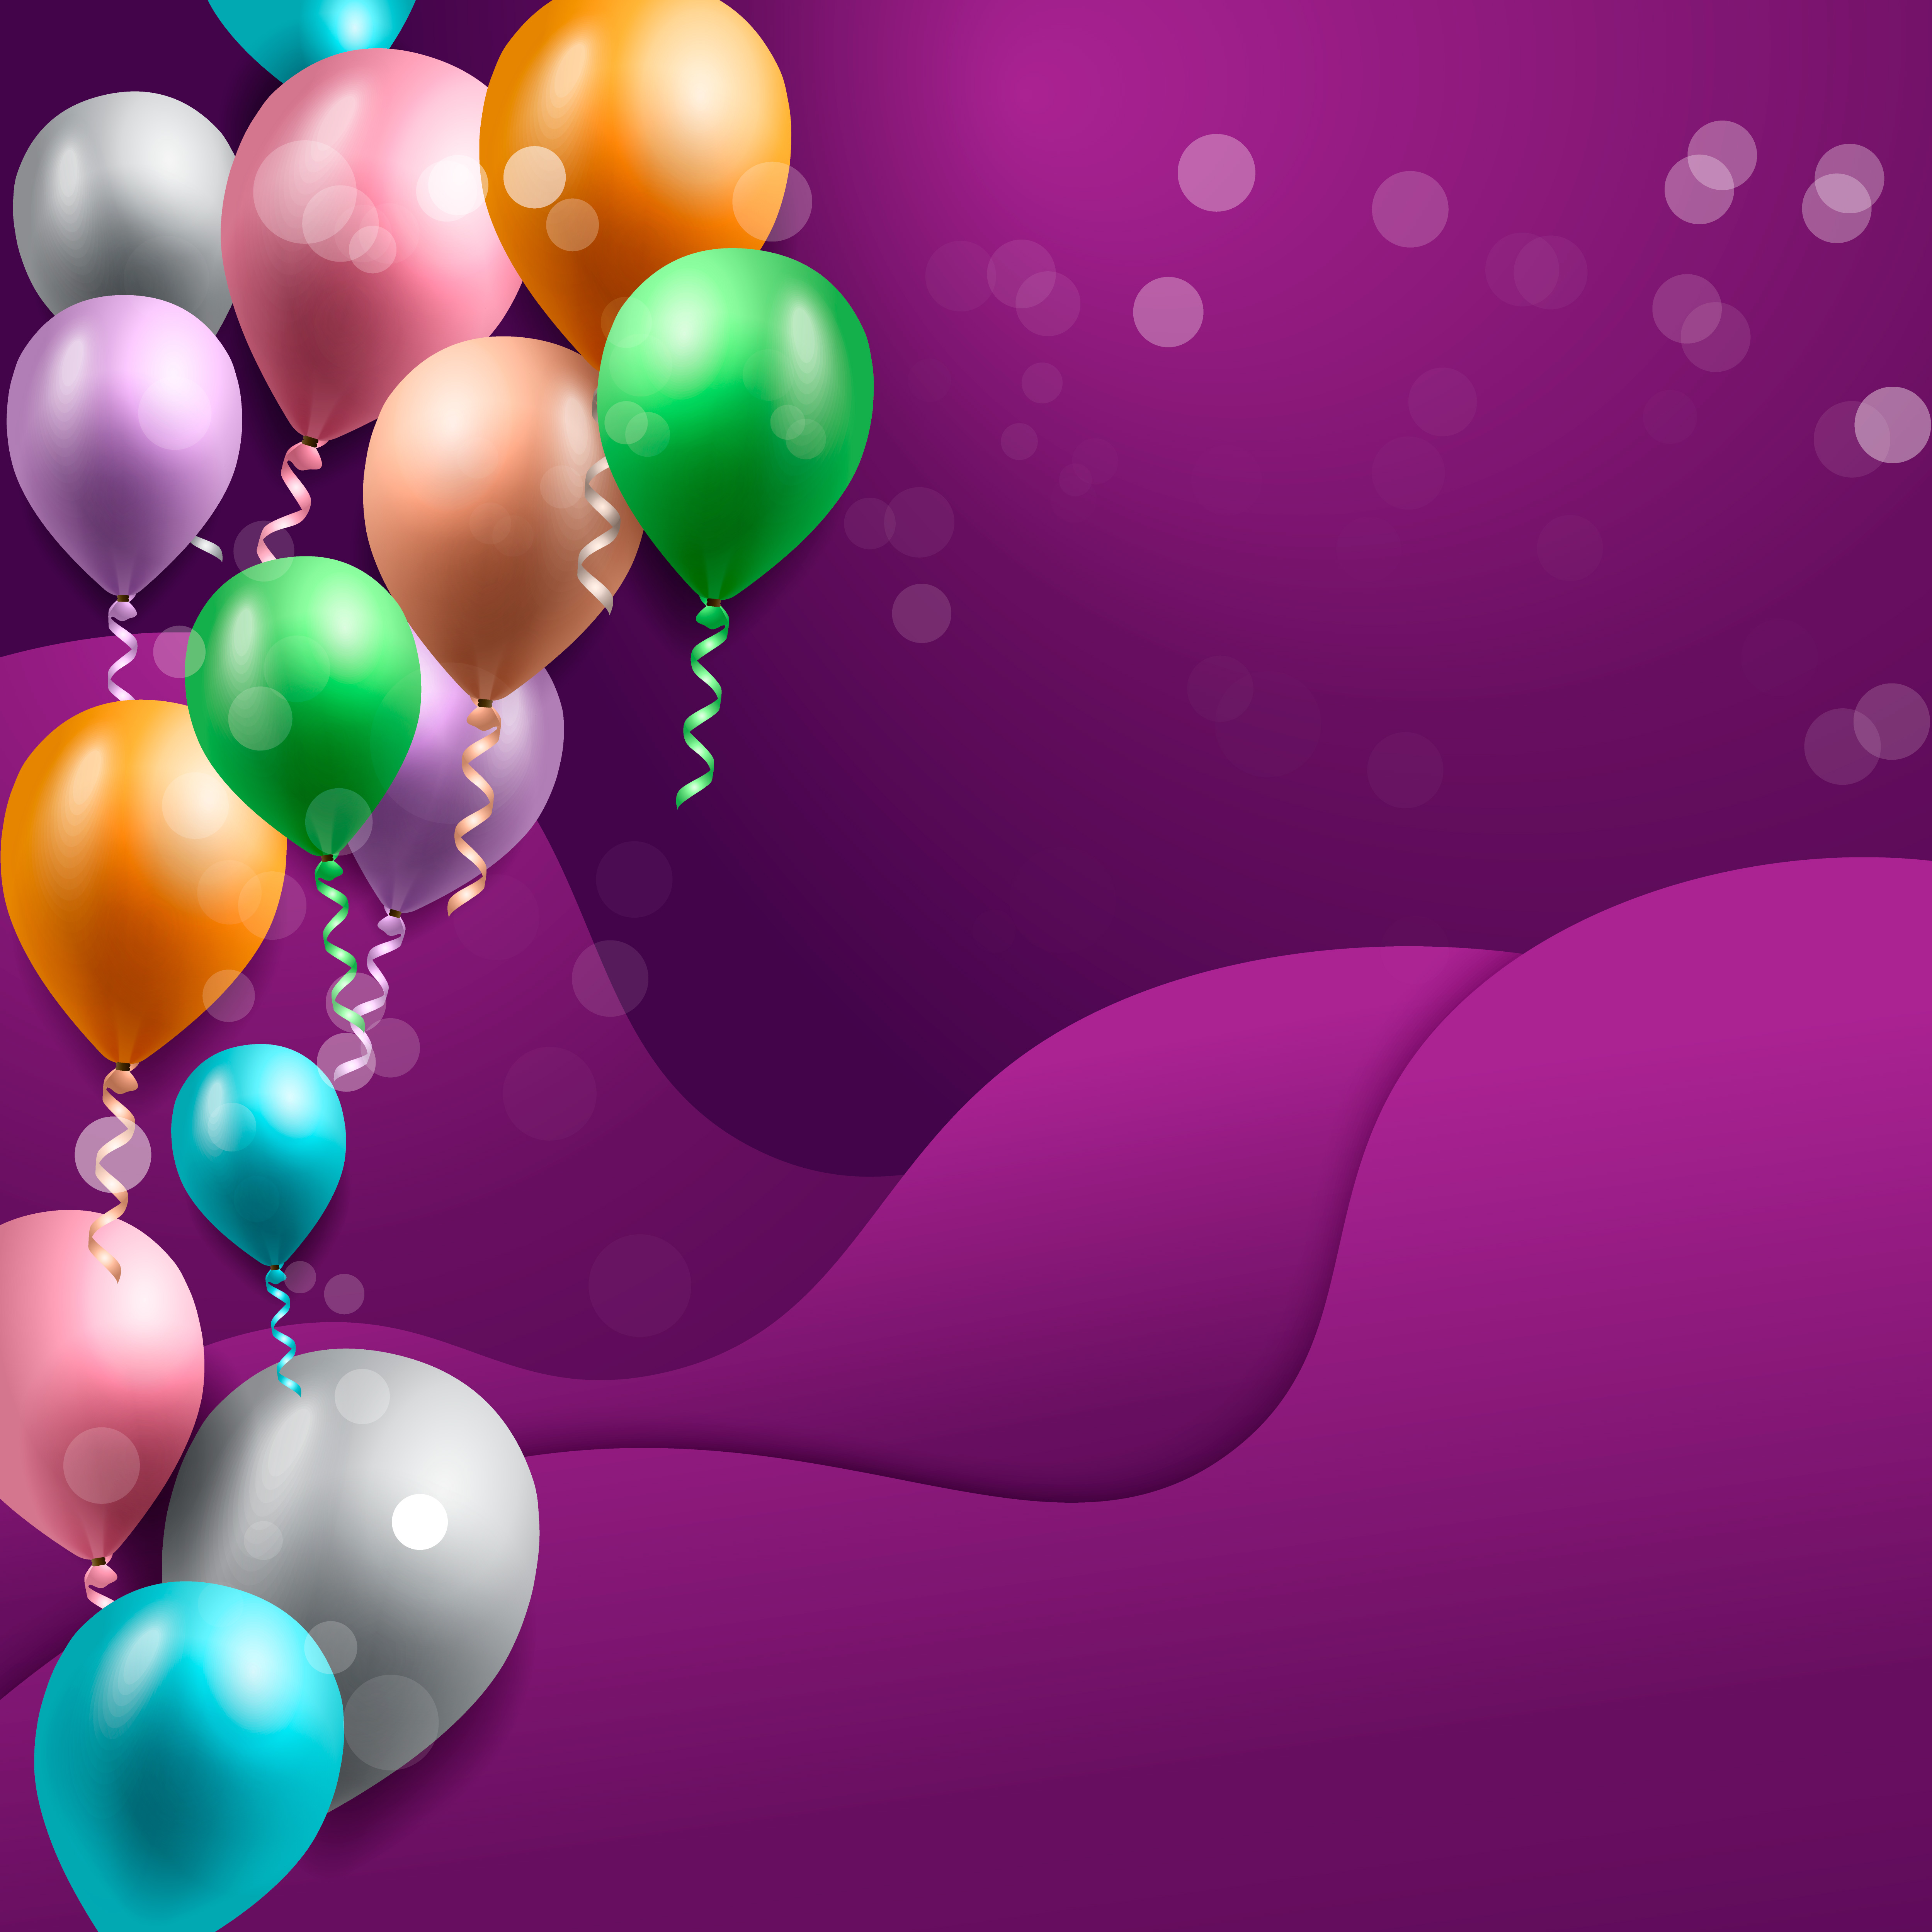 Free Birthday Balloon Wallpaper | All in one Photos